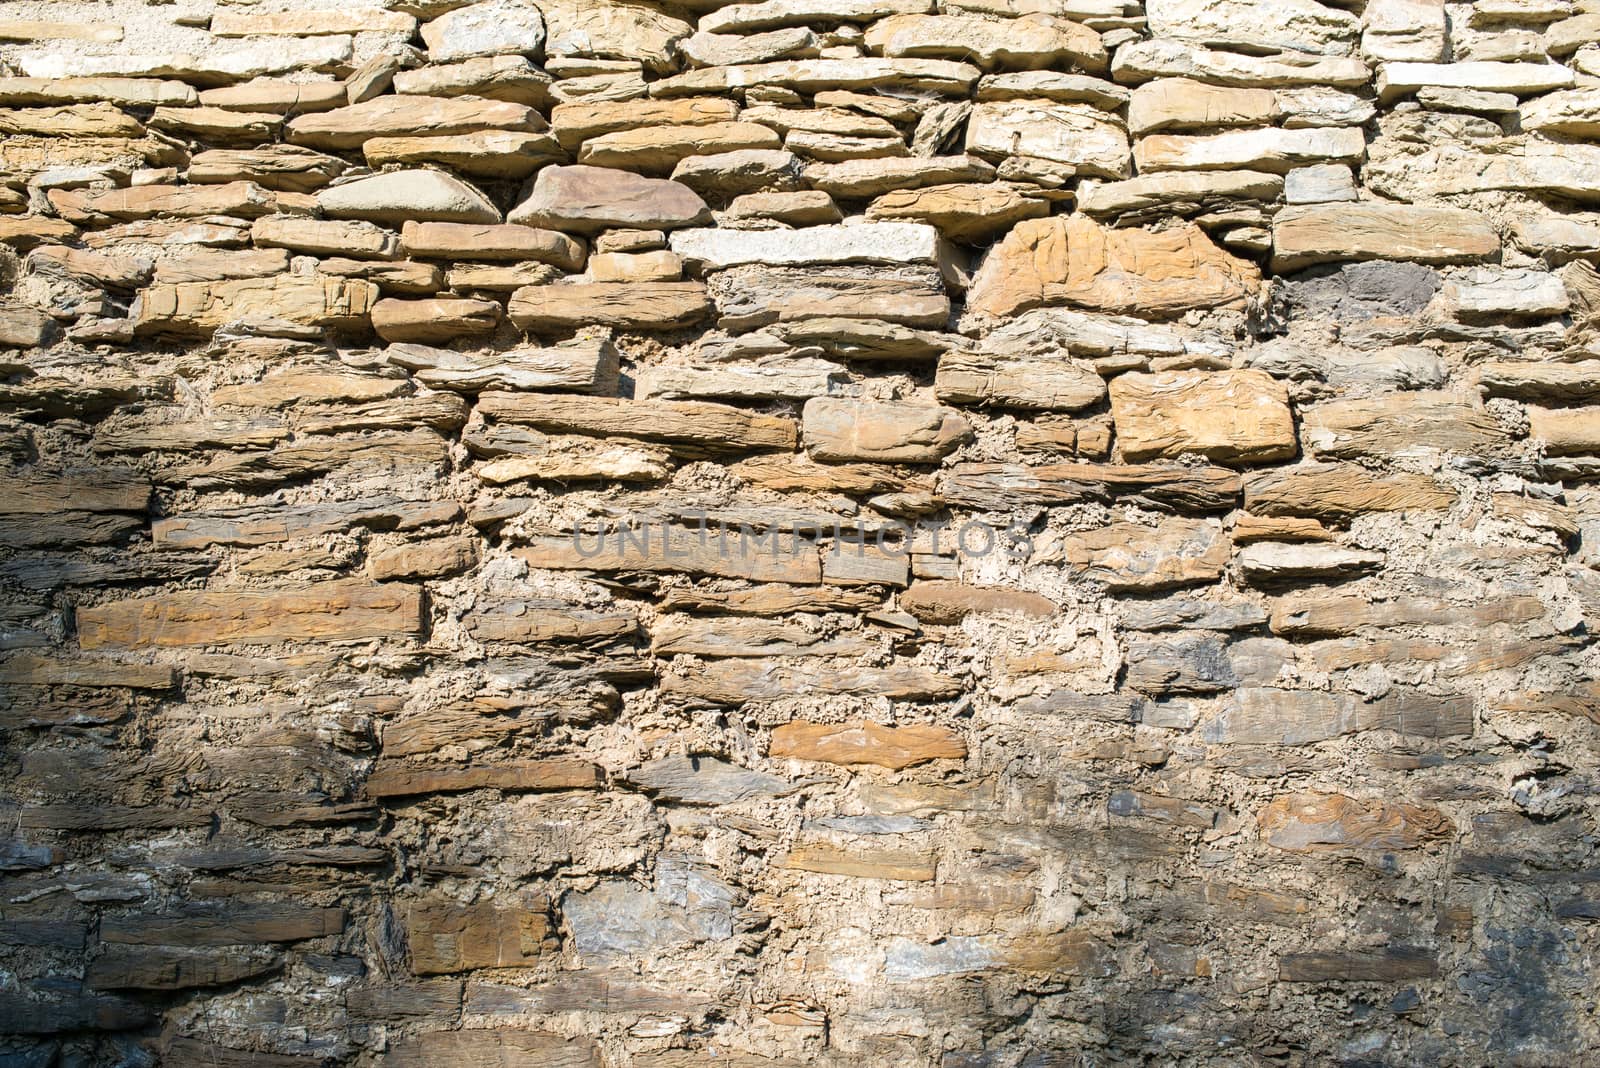 Stone masonry with rich and various texture by rootstocks